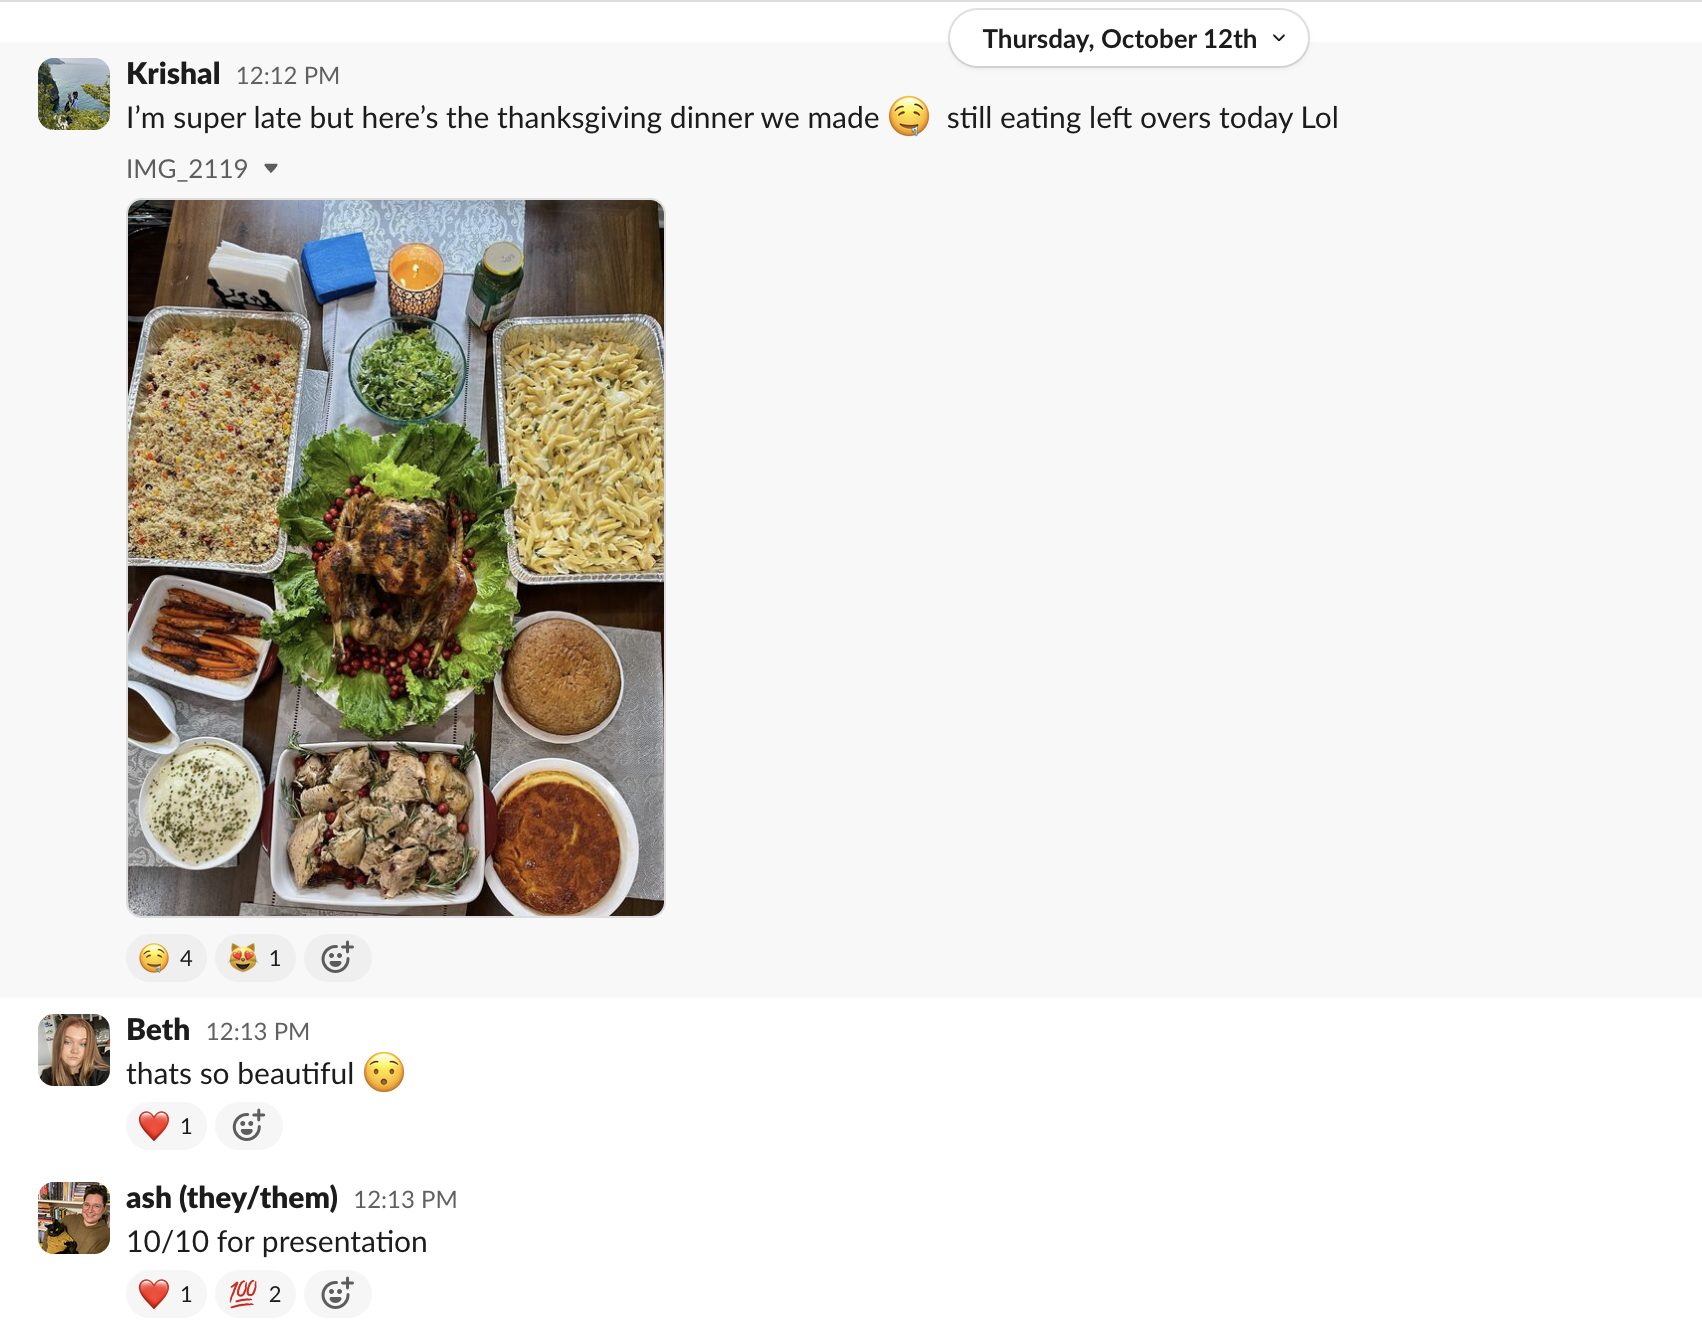 A screenshot of our team chatting in our food-related Slack channel.